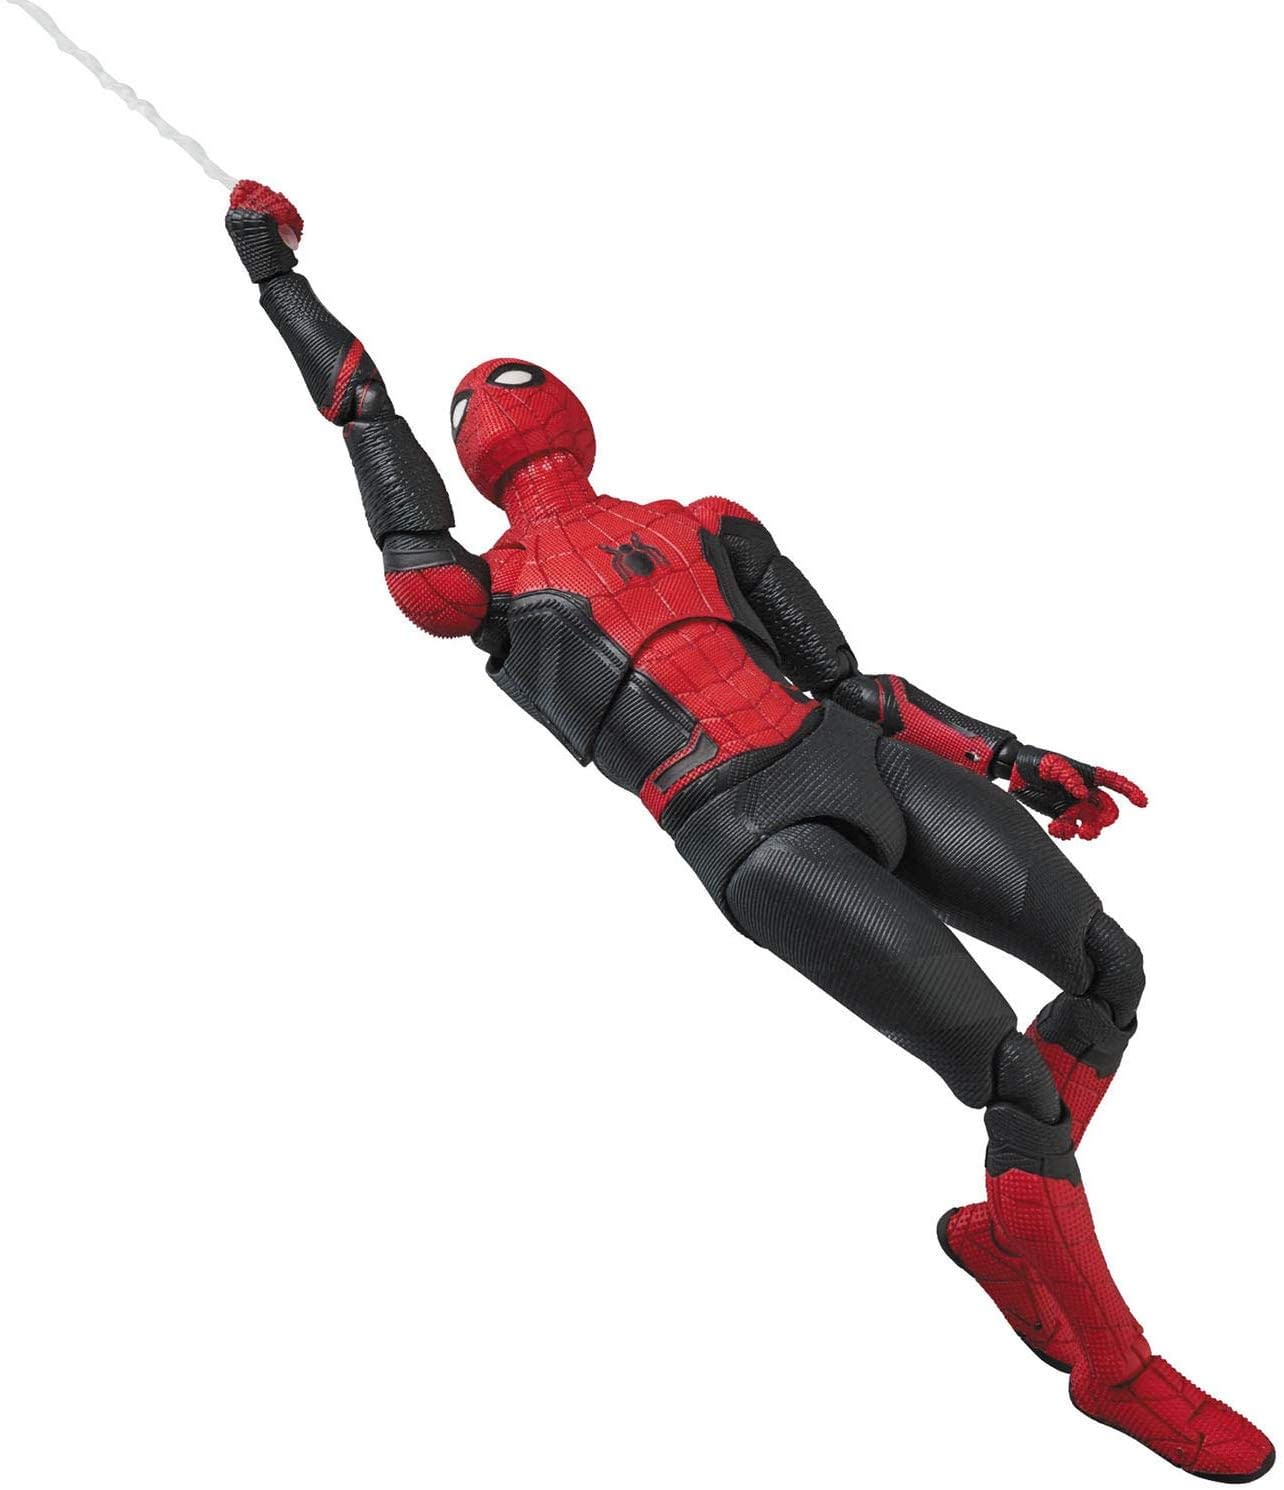 Spider-Man's New Upgraded Suit Is Ready for Action with MAFEX